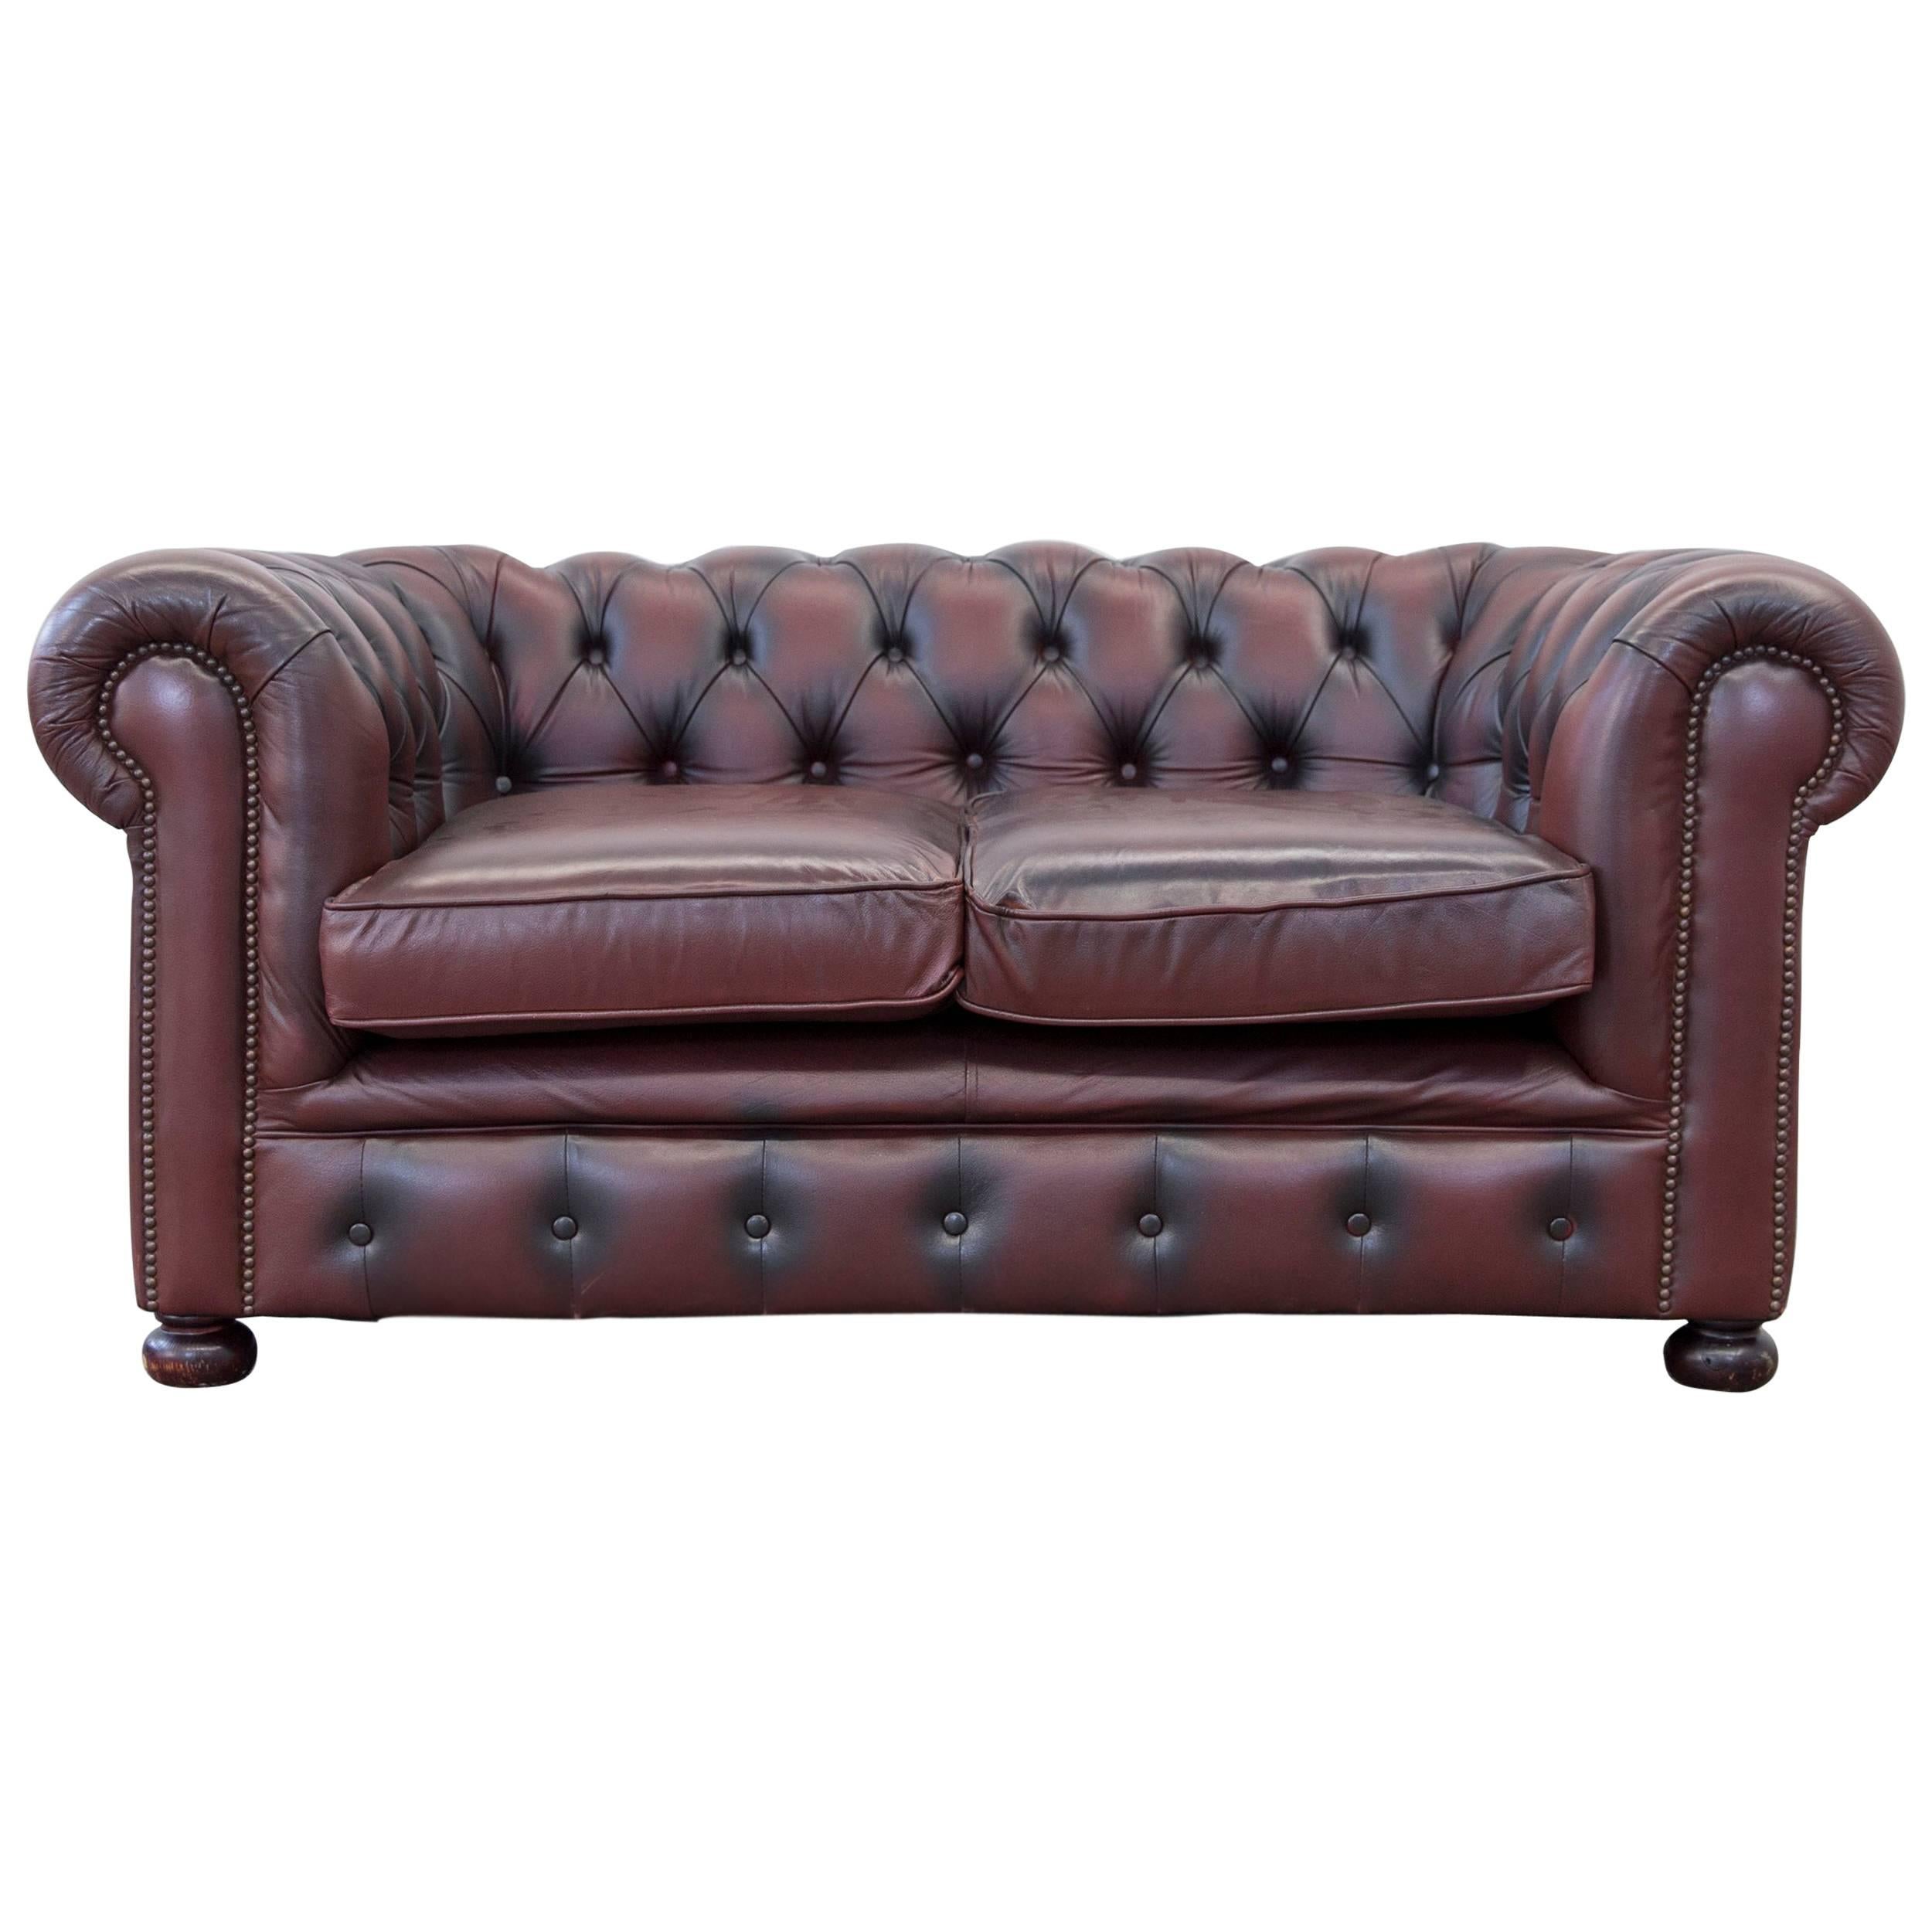 Original Chesterfield Two-Seat Couch Red Brown Authentic Leather